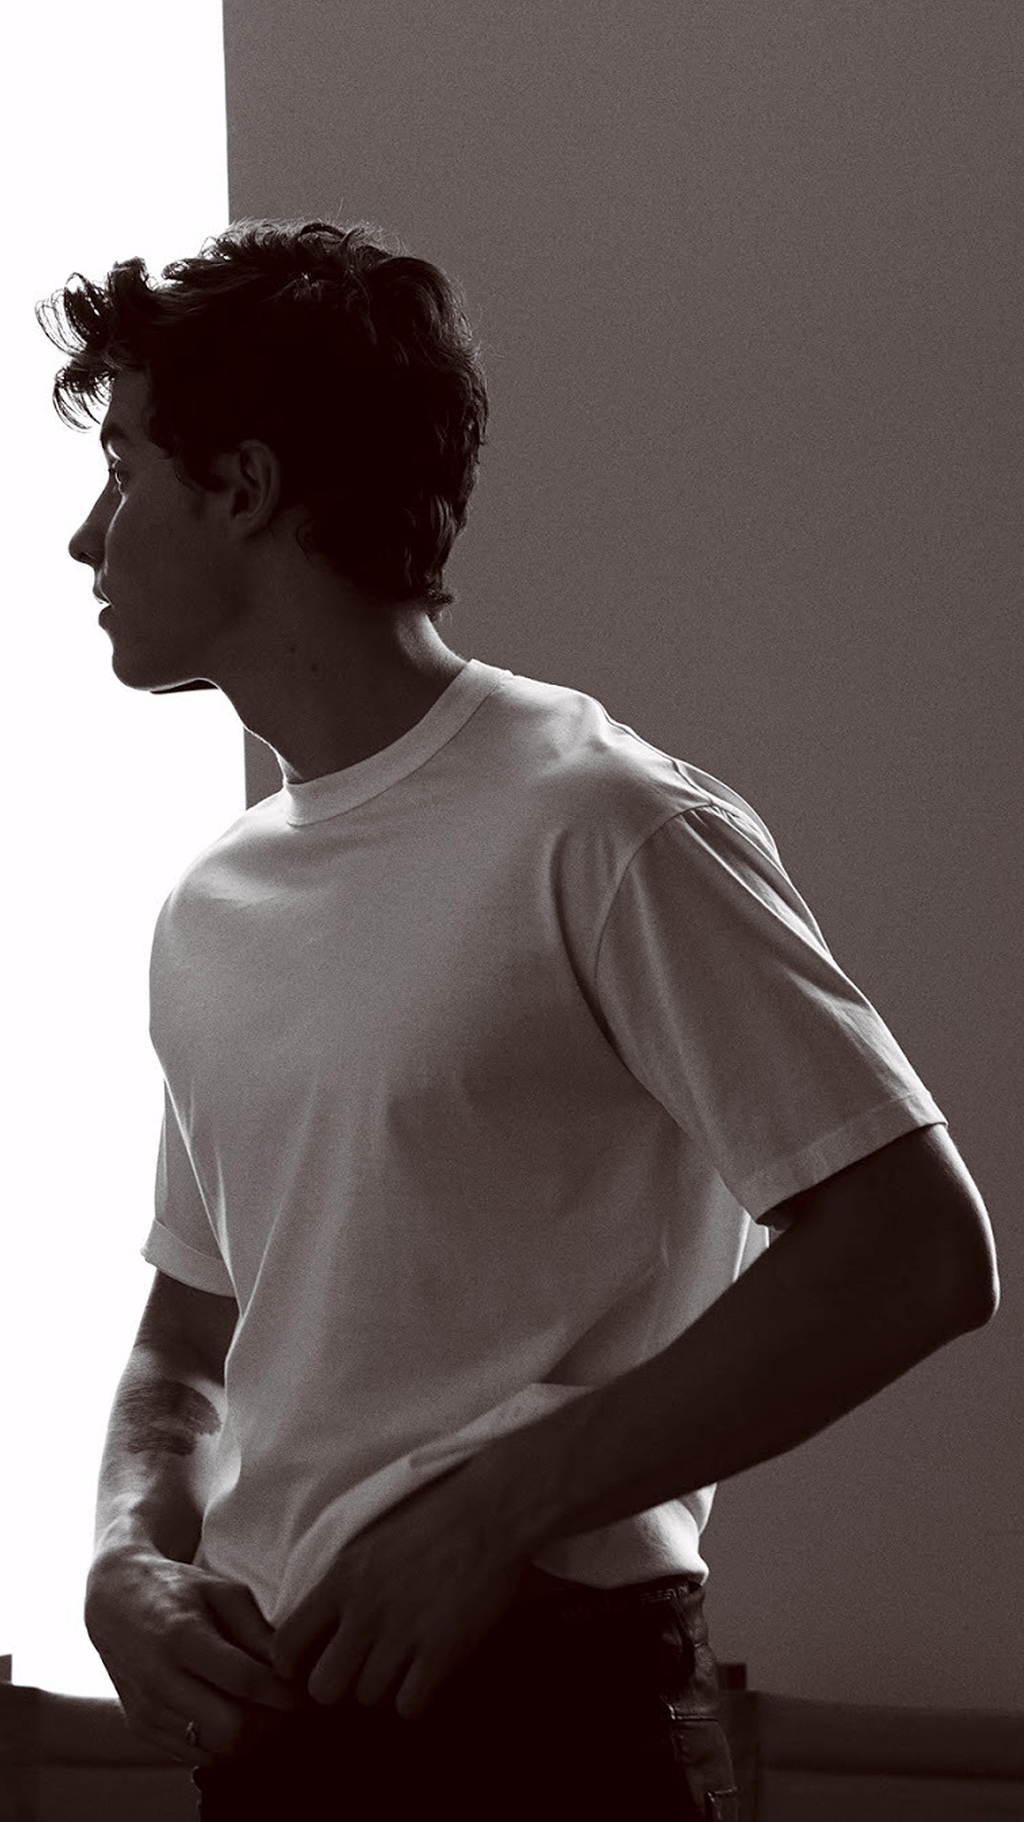 shawn mendes wallpaper. Poses in 2019